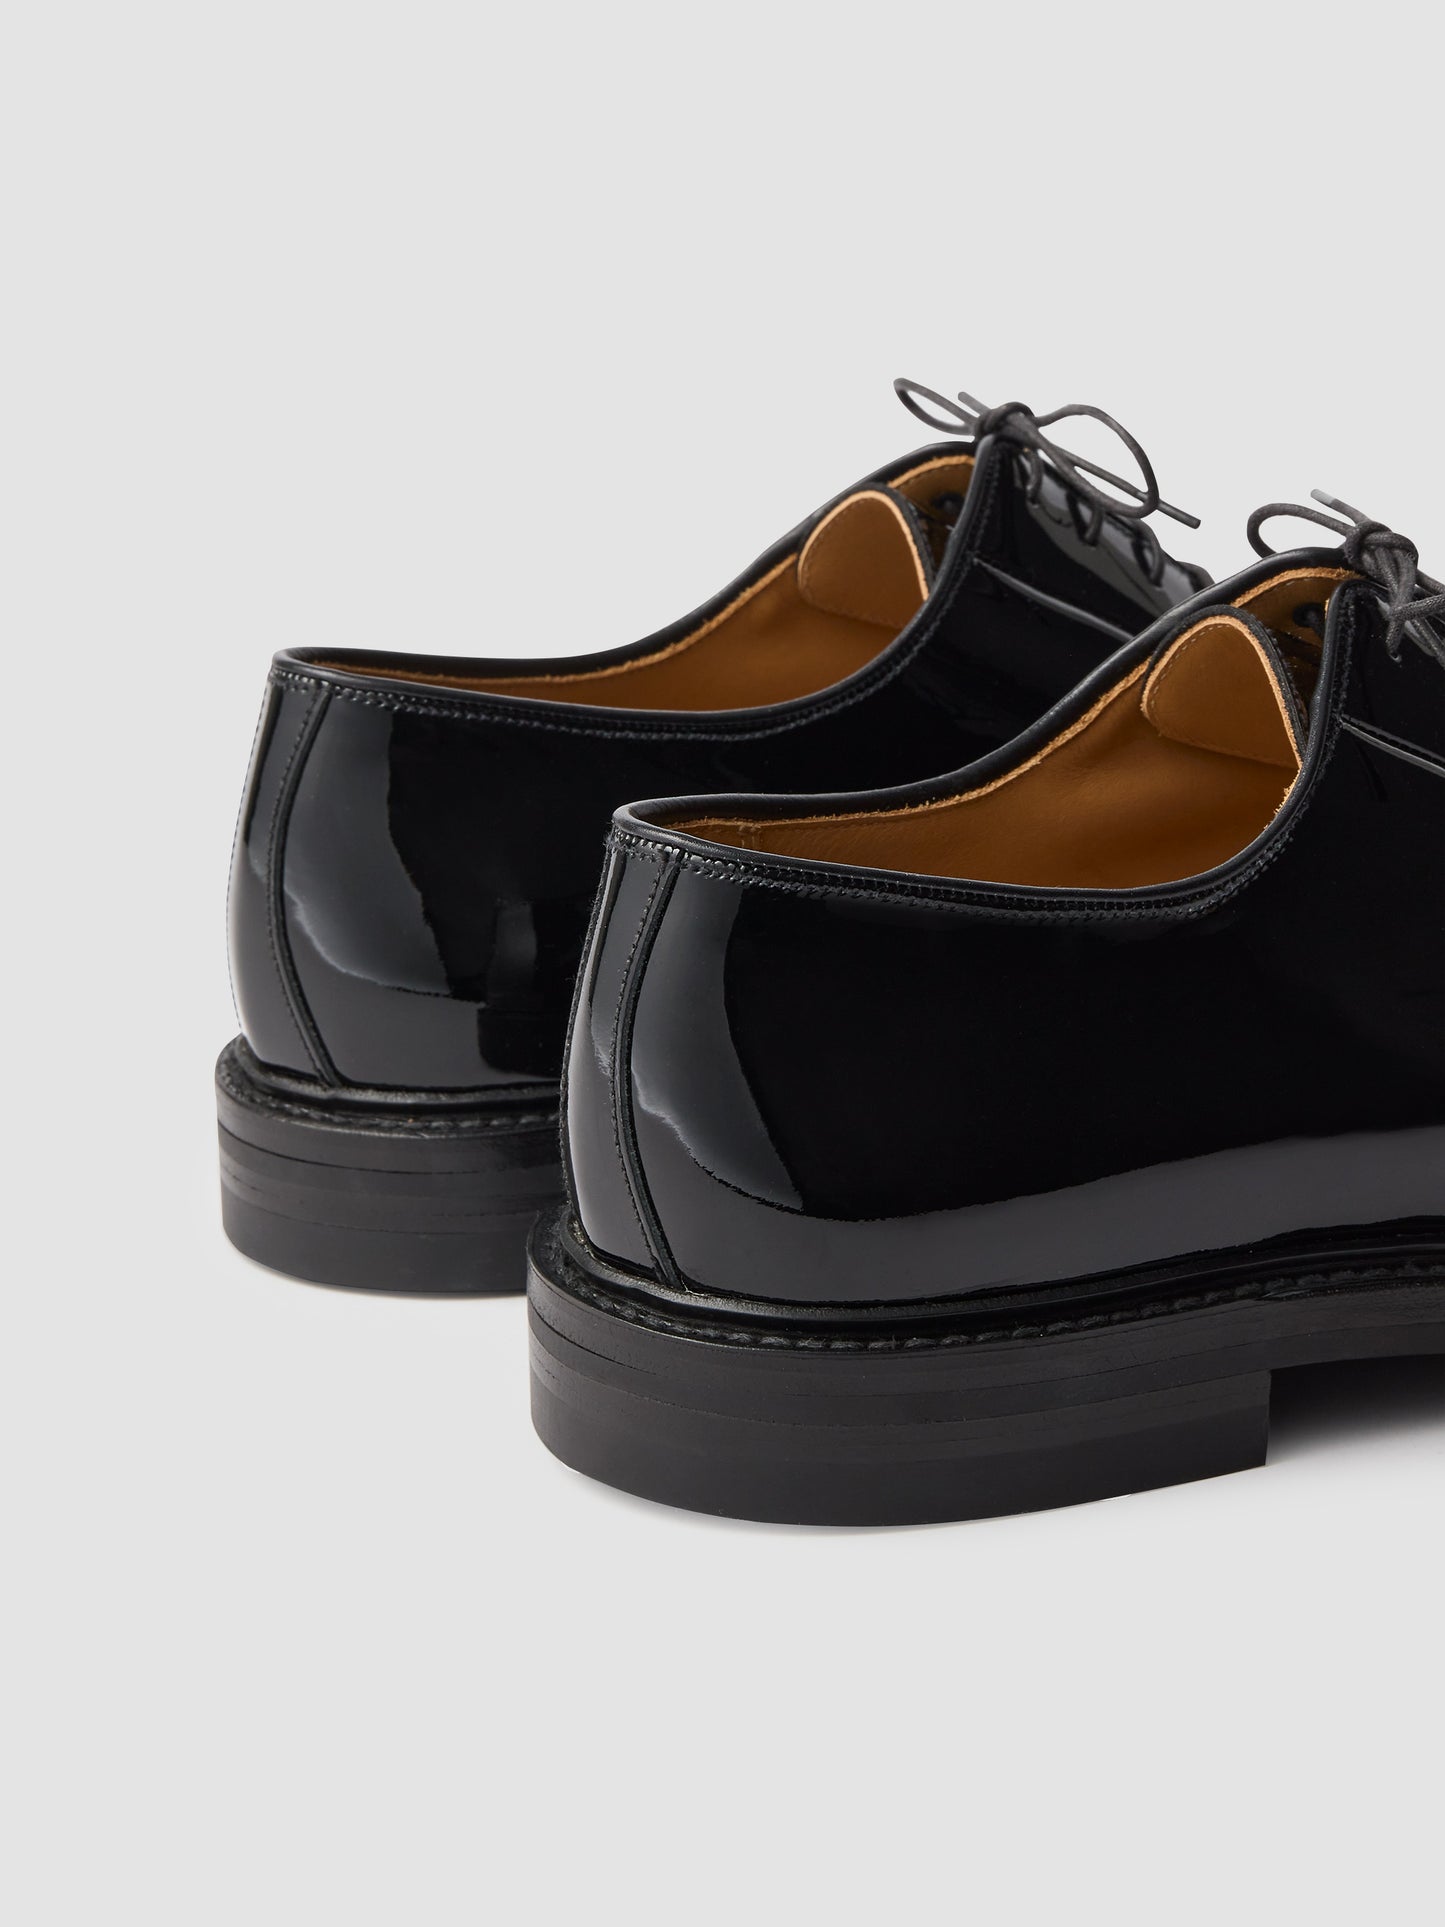 Patent Derby Dress Shoes Black Heel Product Image